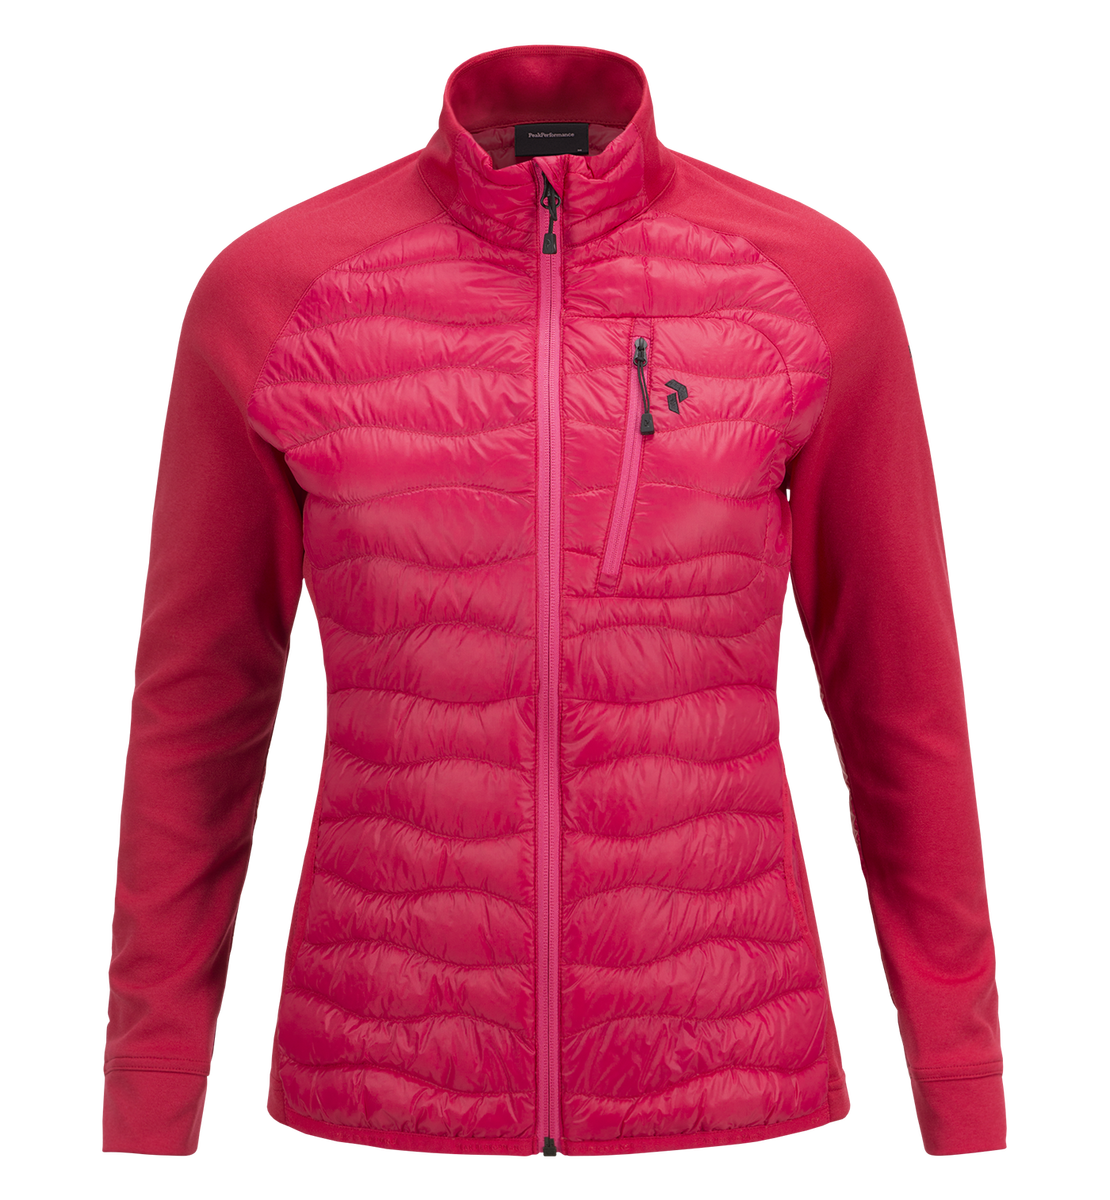 Pink Jacket For Women PNG Image with Transparent Background